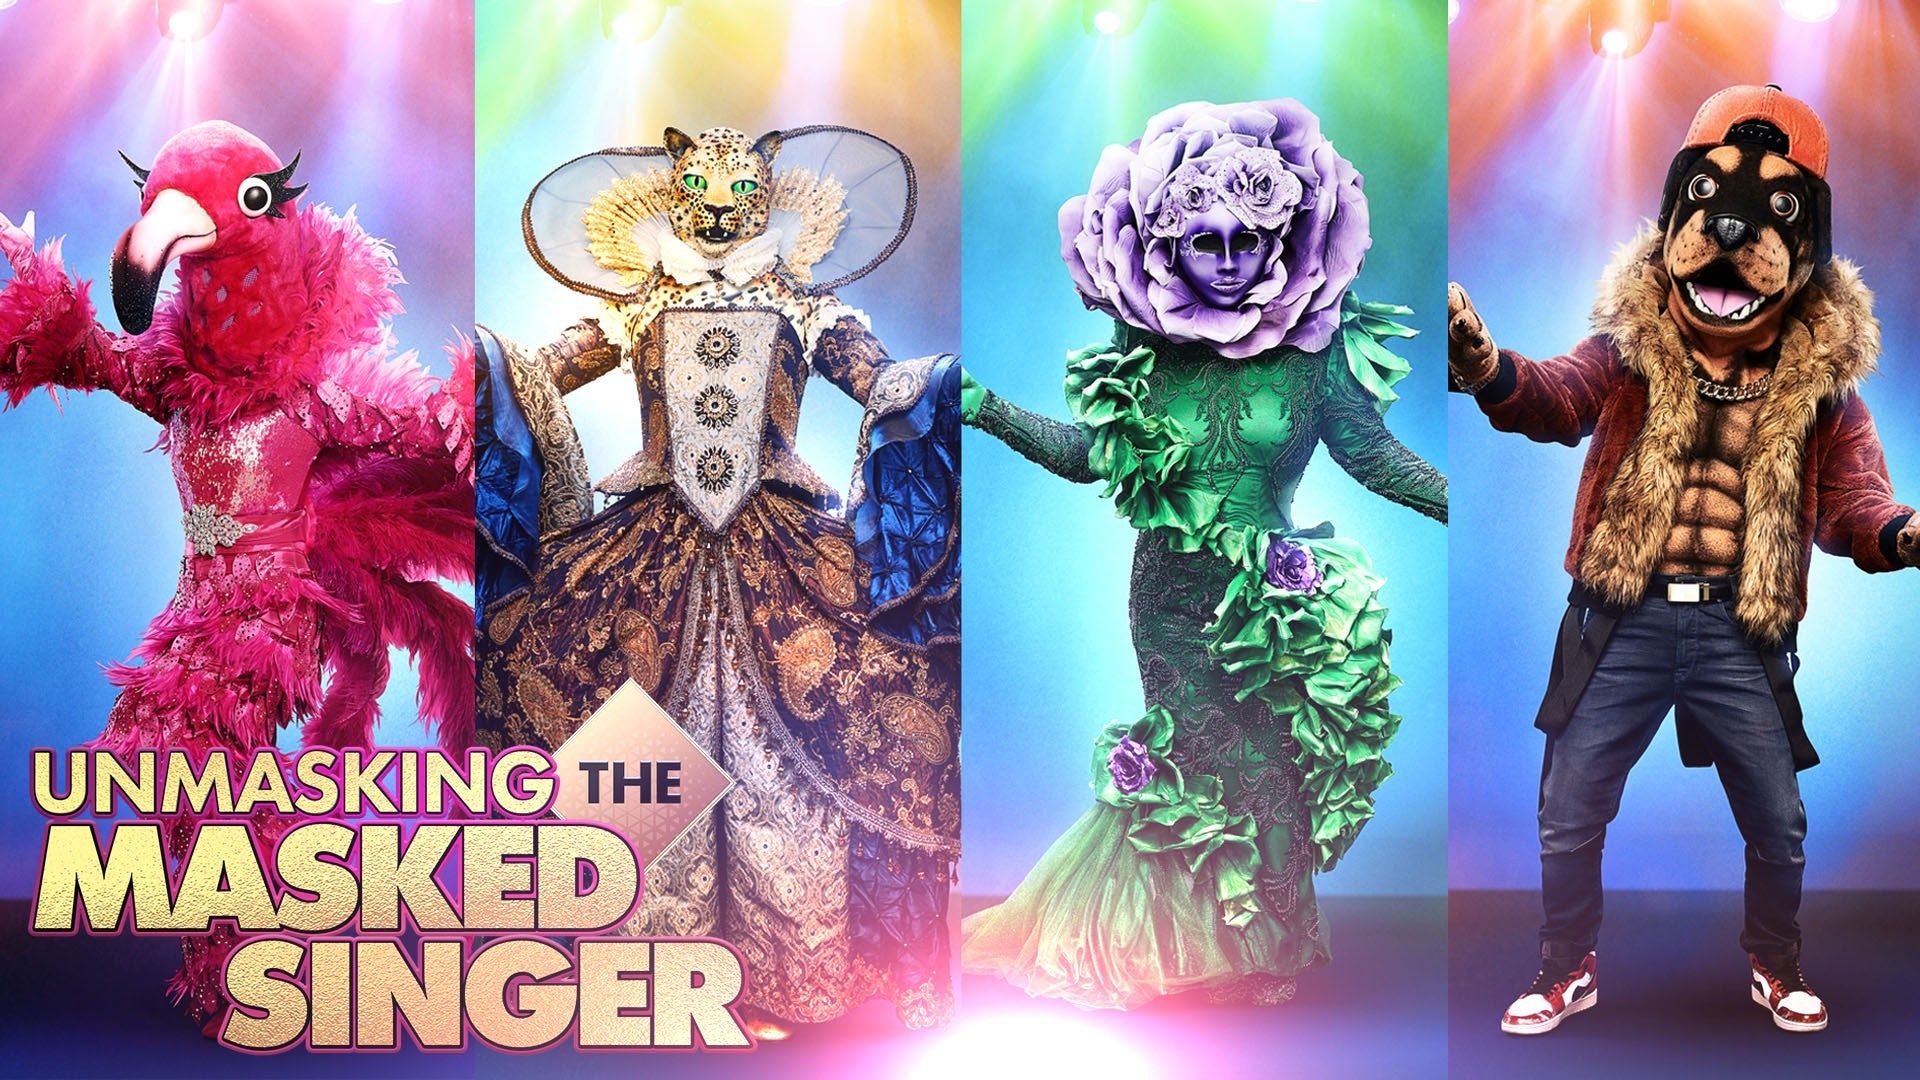 The Masked Singer': The Flower Gets Pruned - See What Music Icon